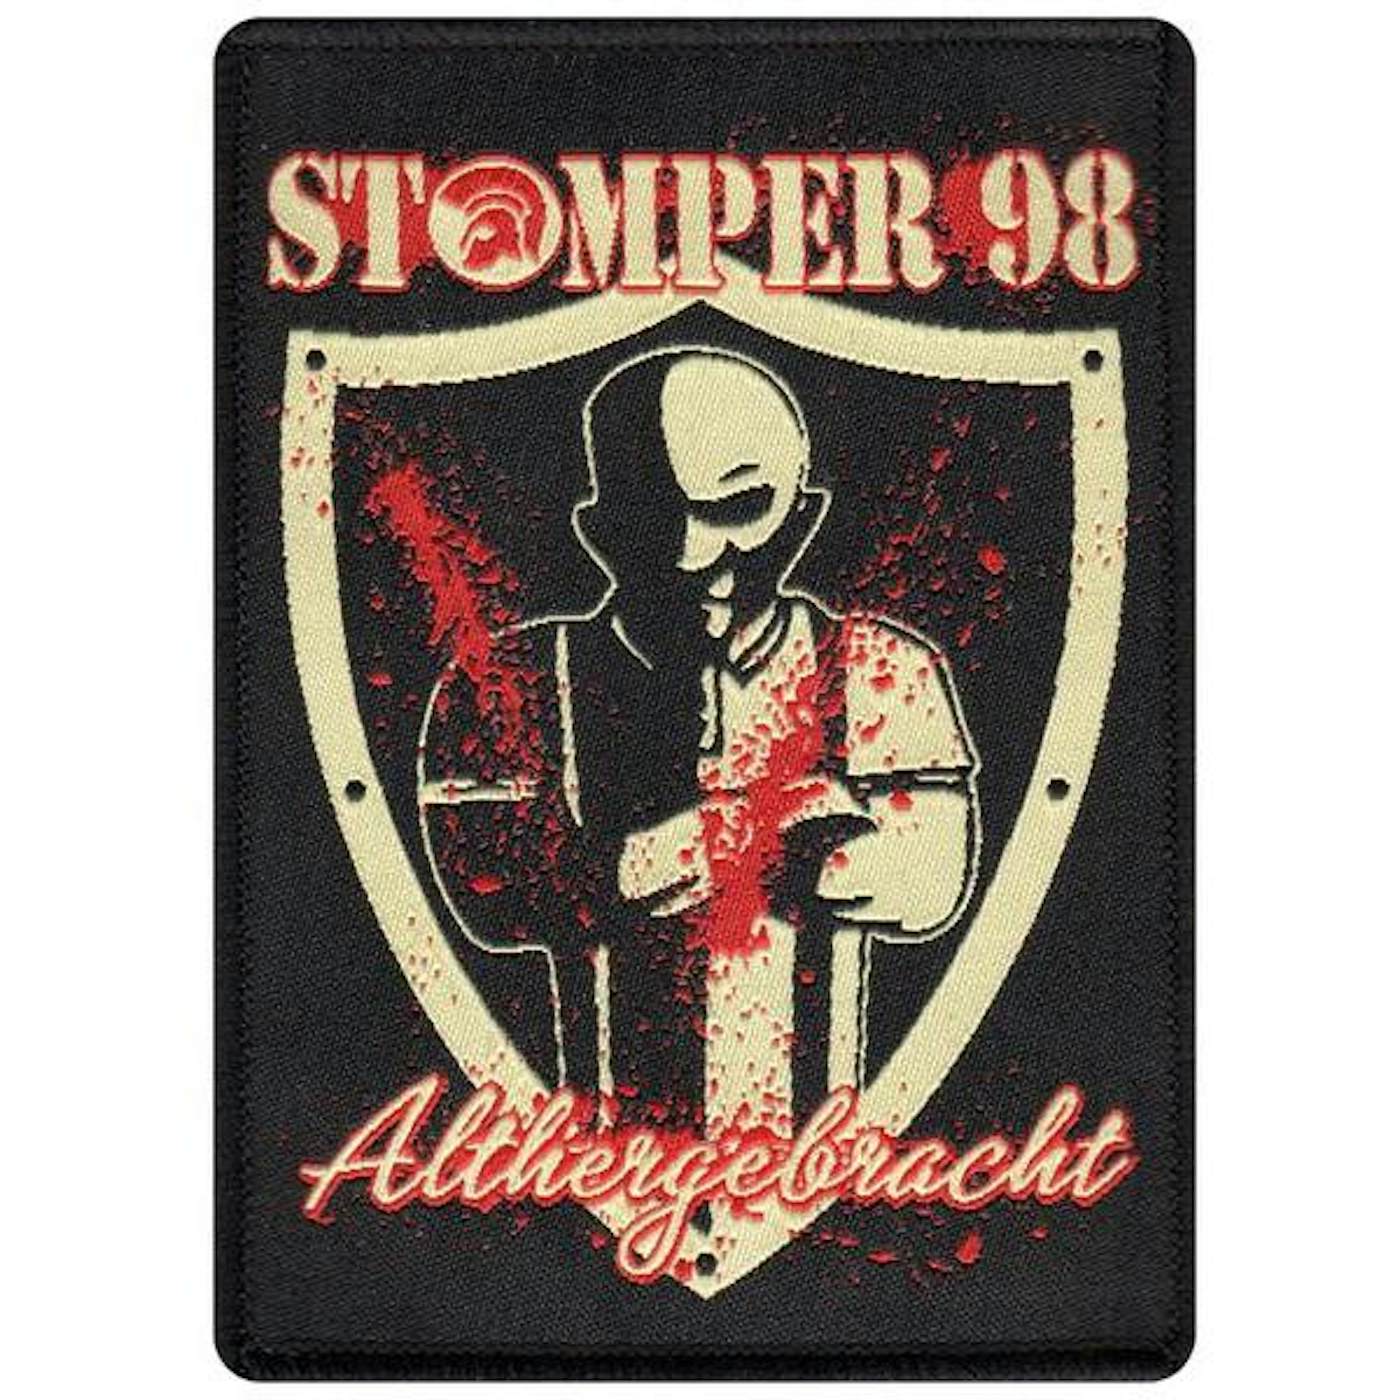 Stomper 98 - Althergebracht - Patch - Woven - 4" x 2.75